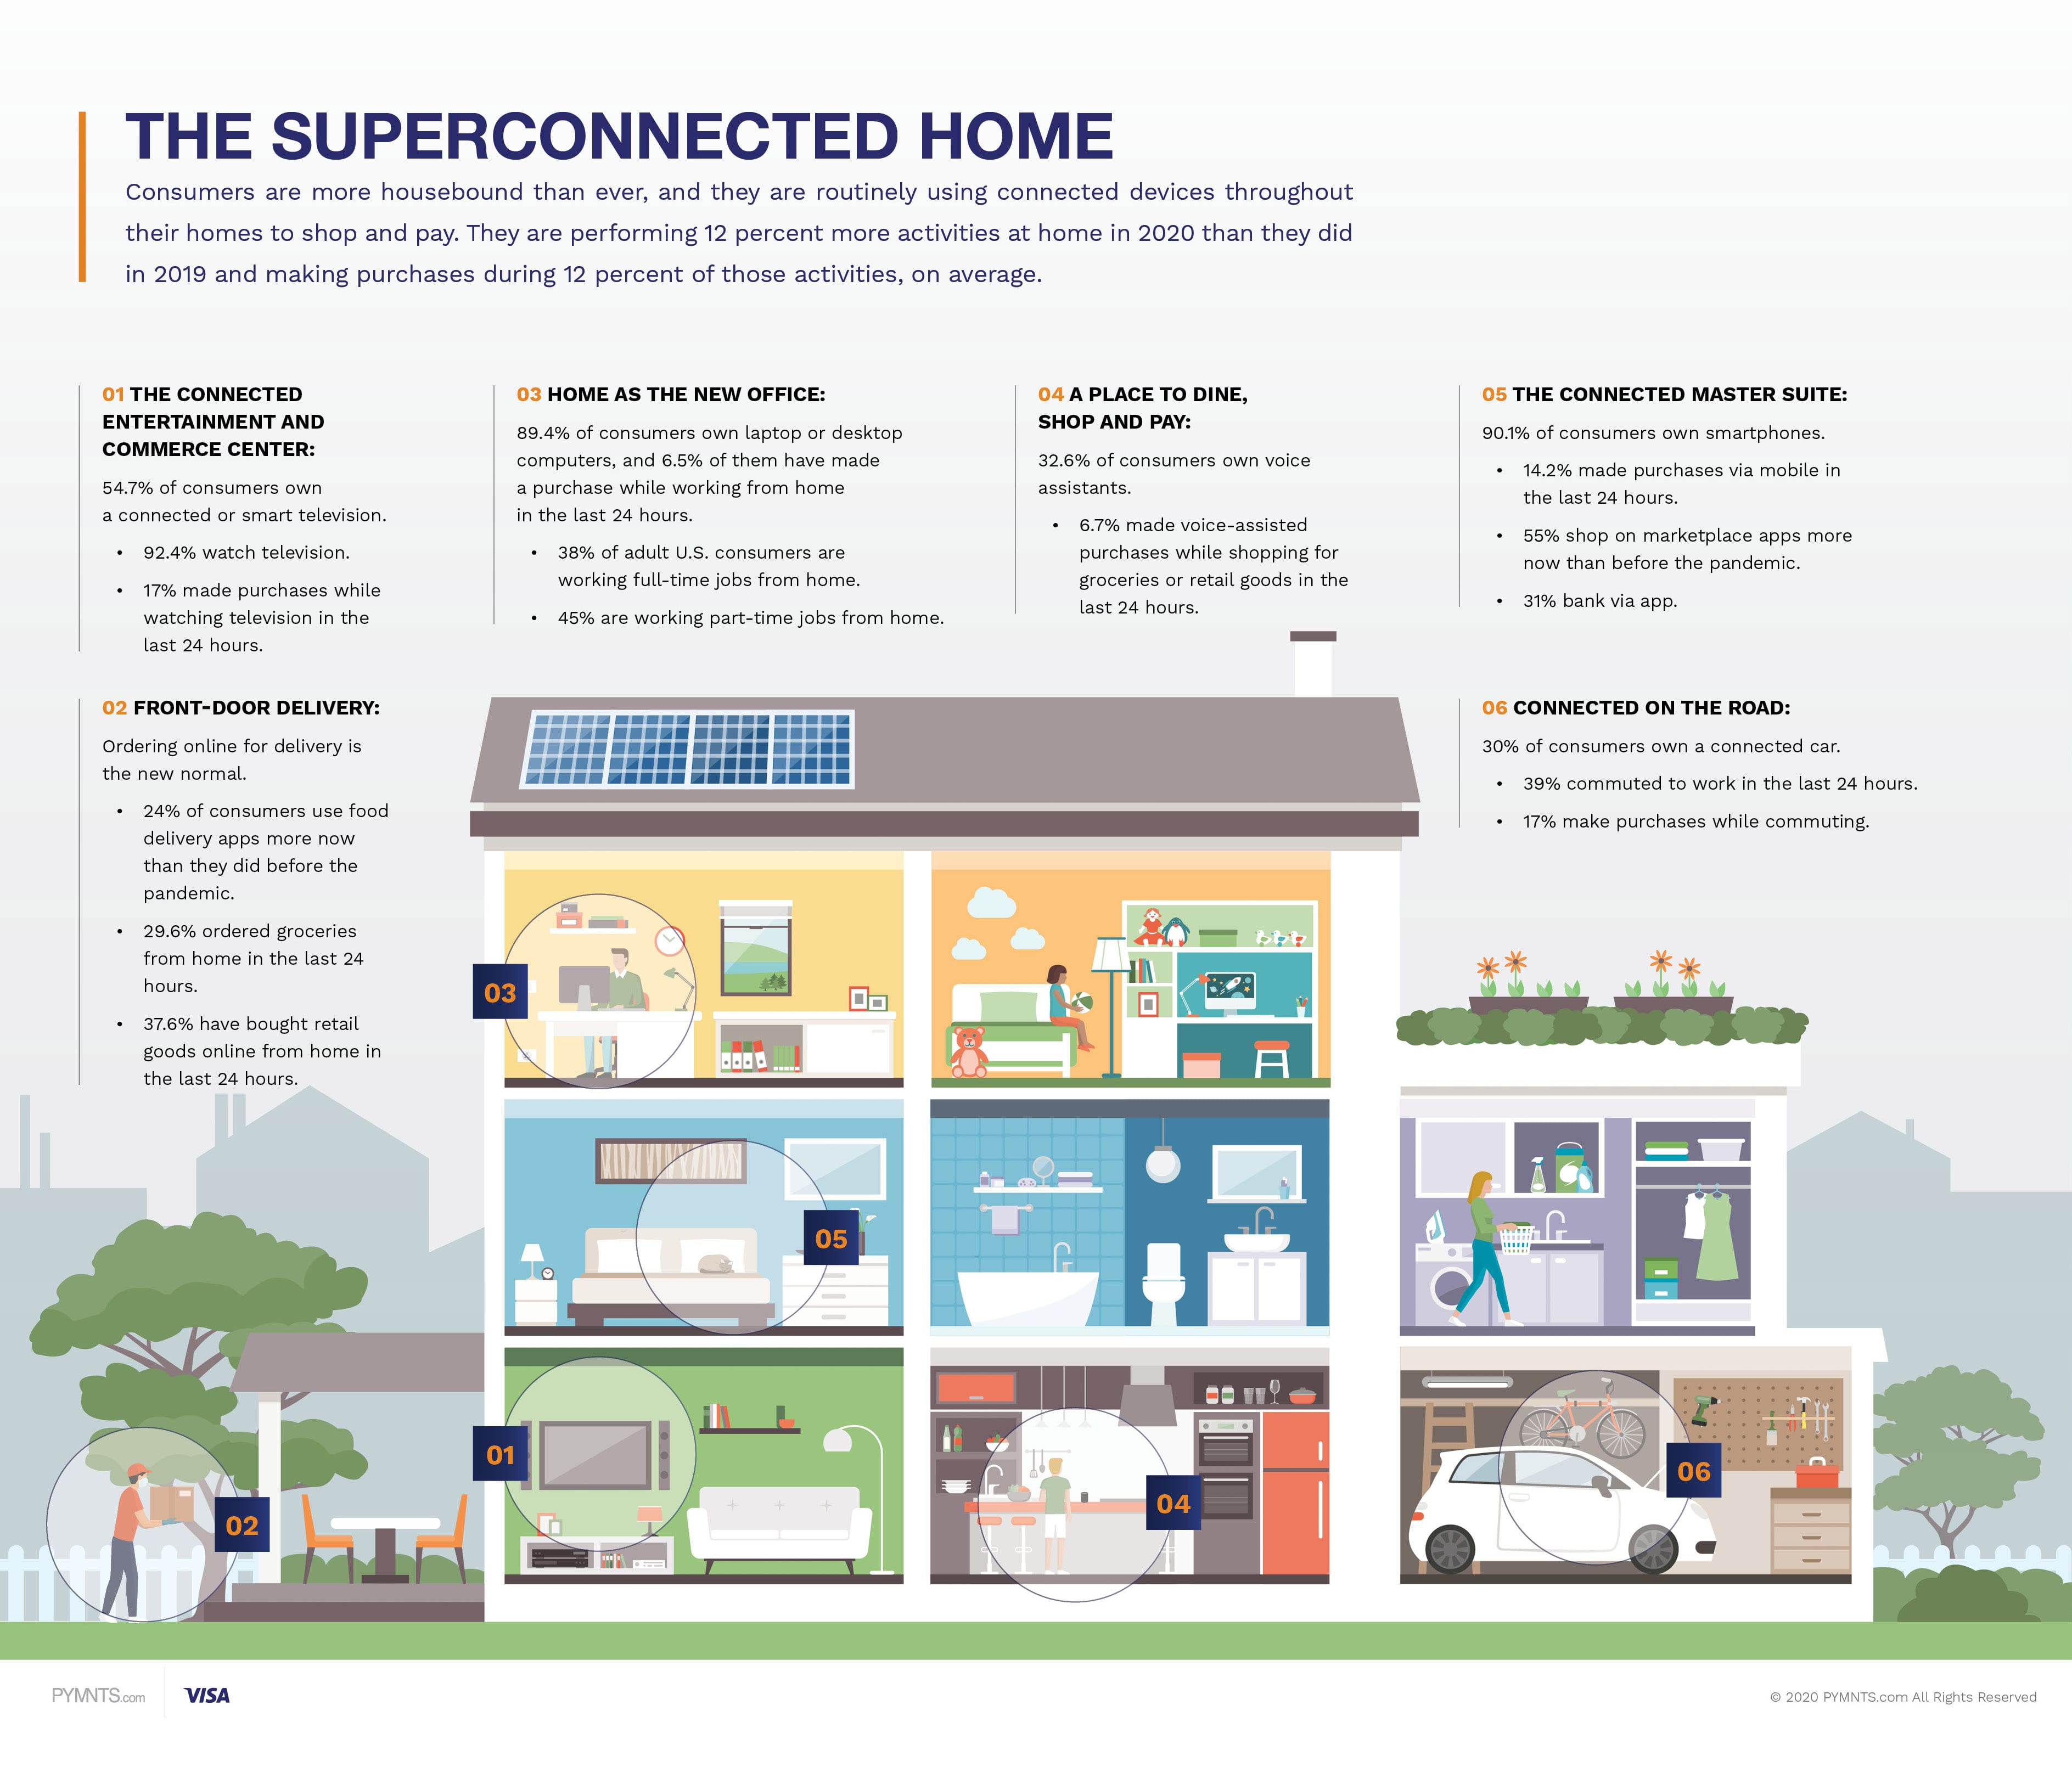 Superconnected home